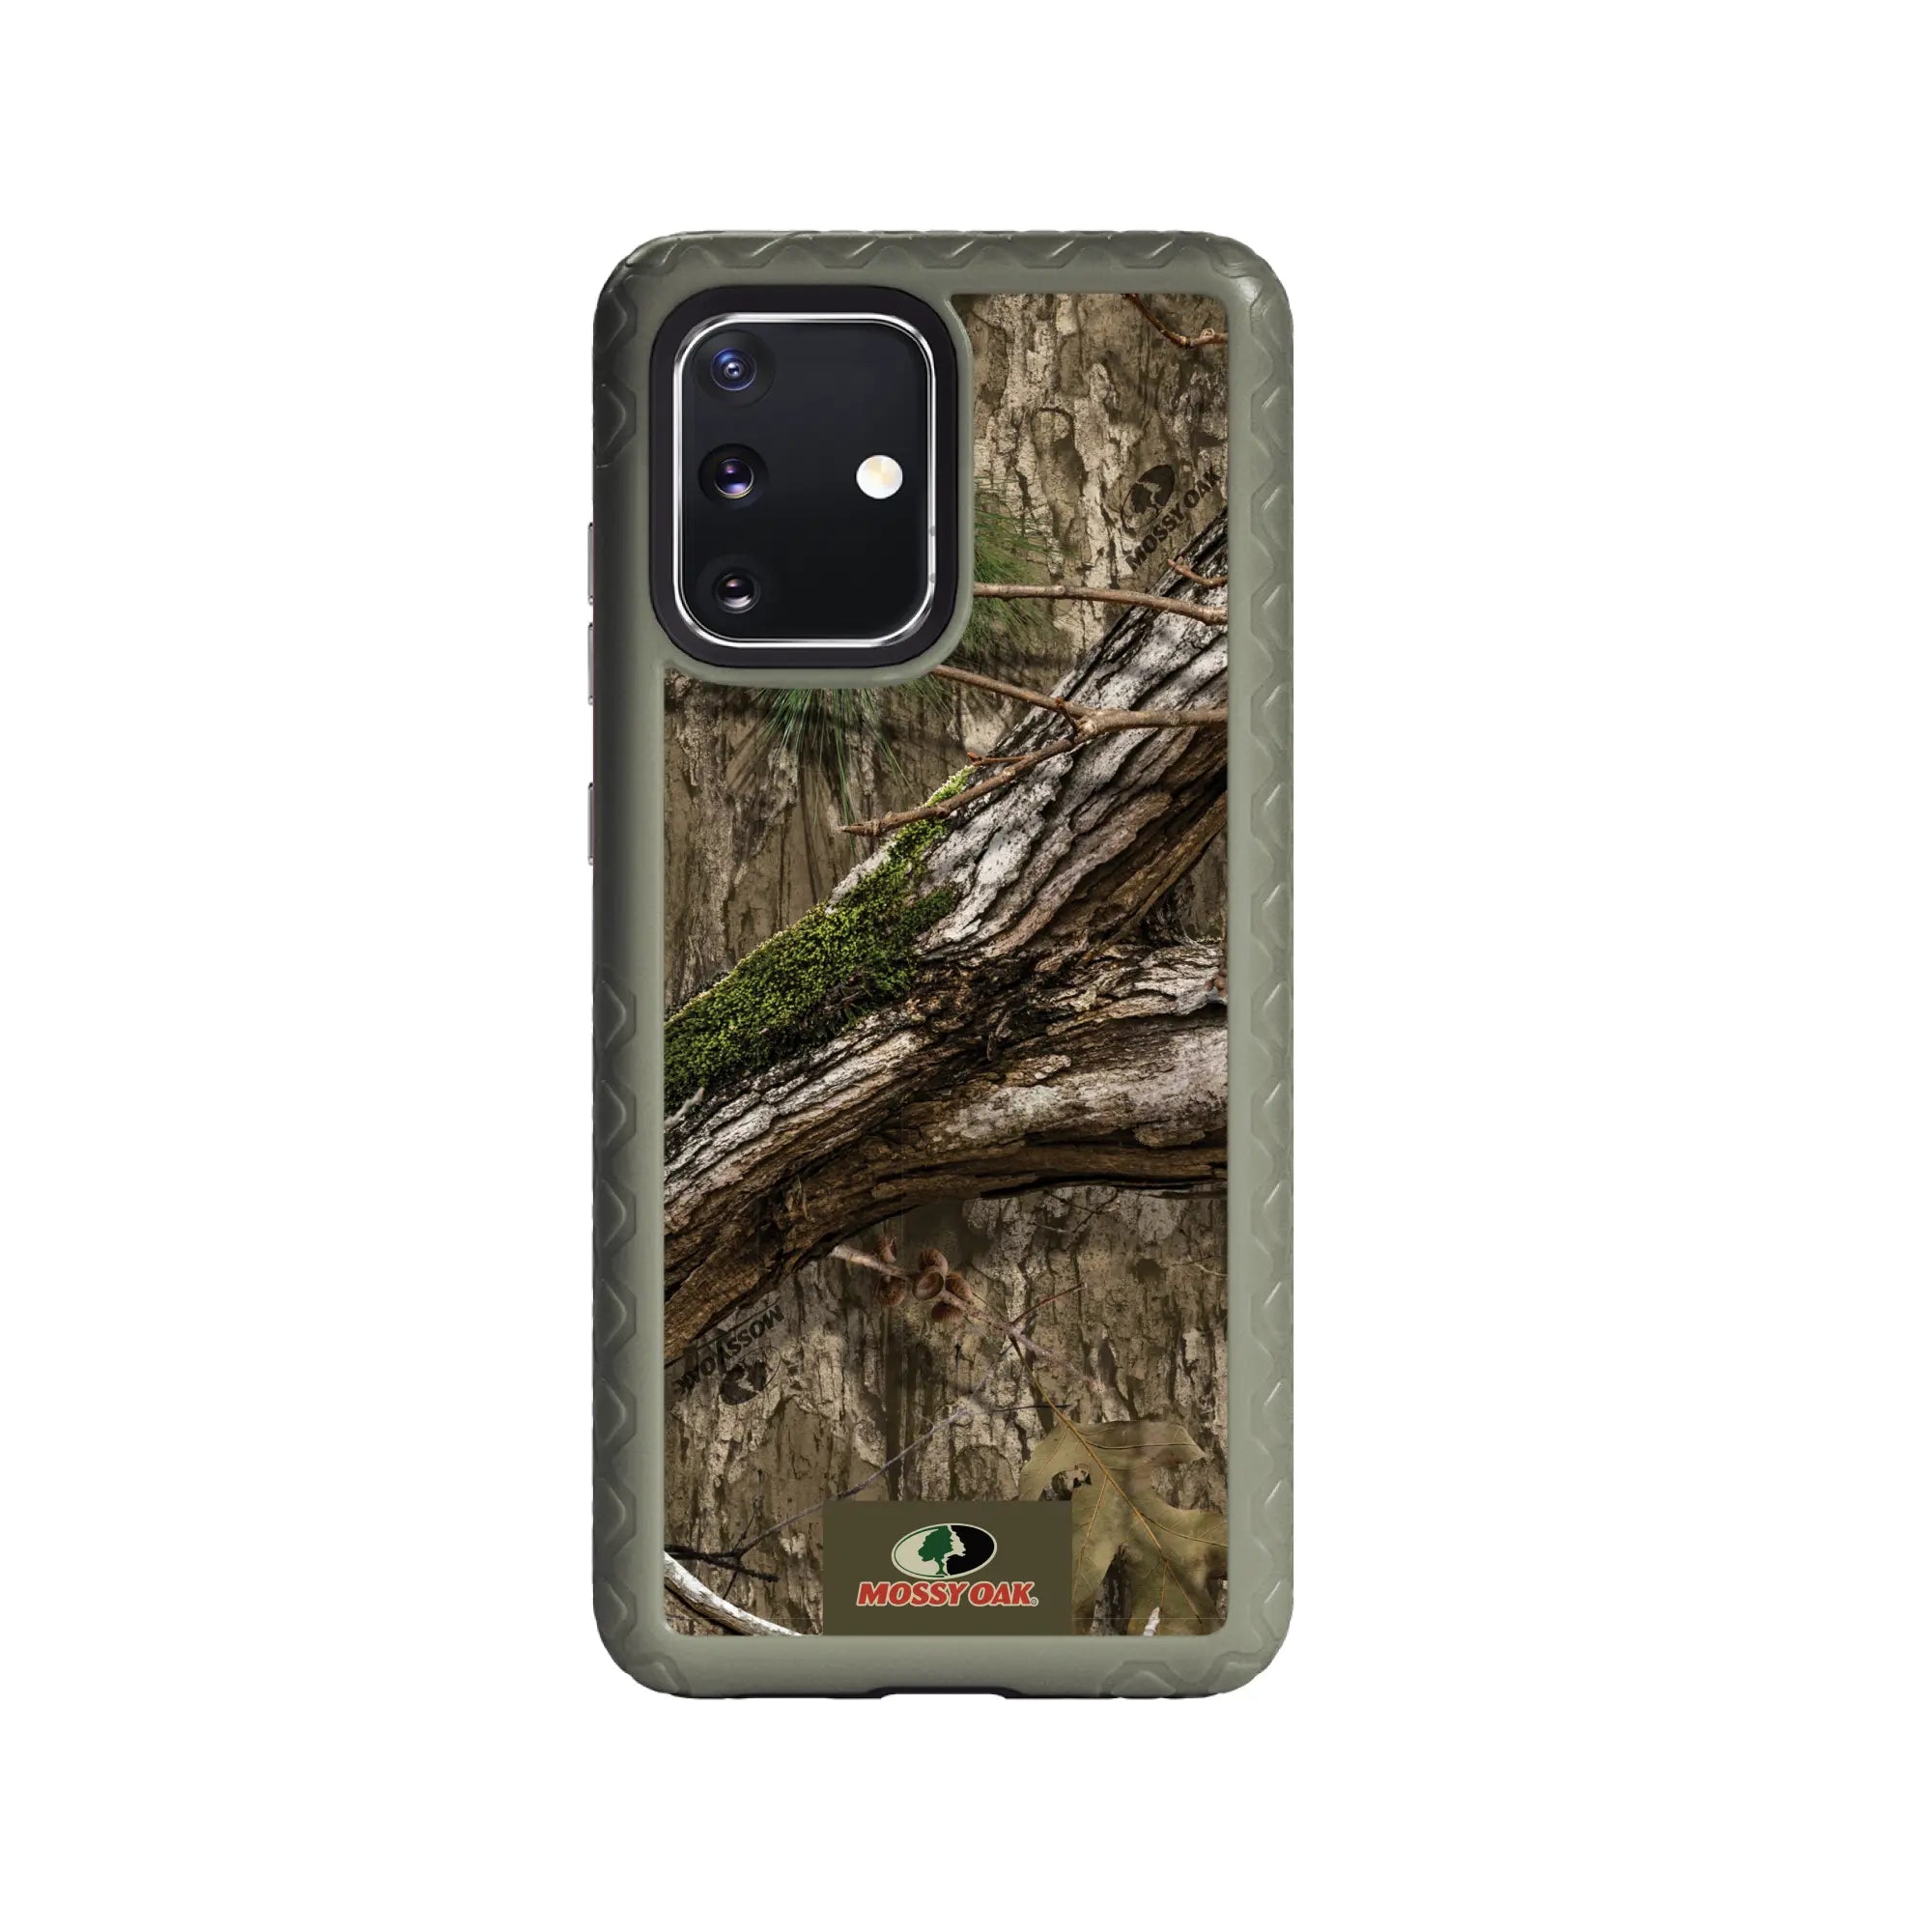 Mossy Oak Fortitude Series for Samsung Galaxy S20 Plus - Country DNA - Custom Case - OliveDrabGreen - cellhelmet